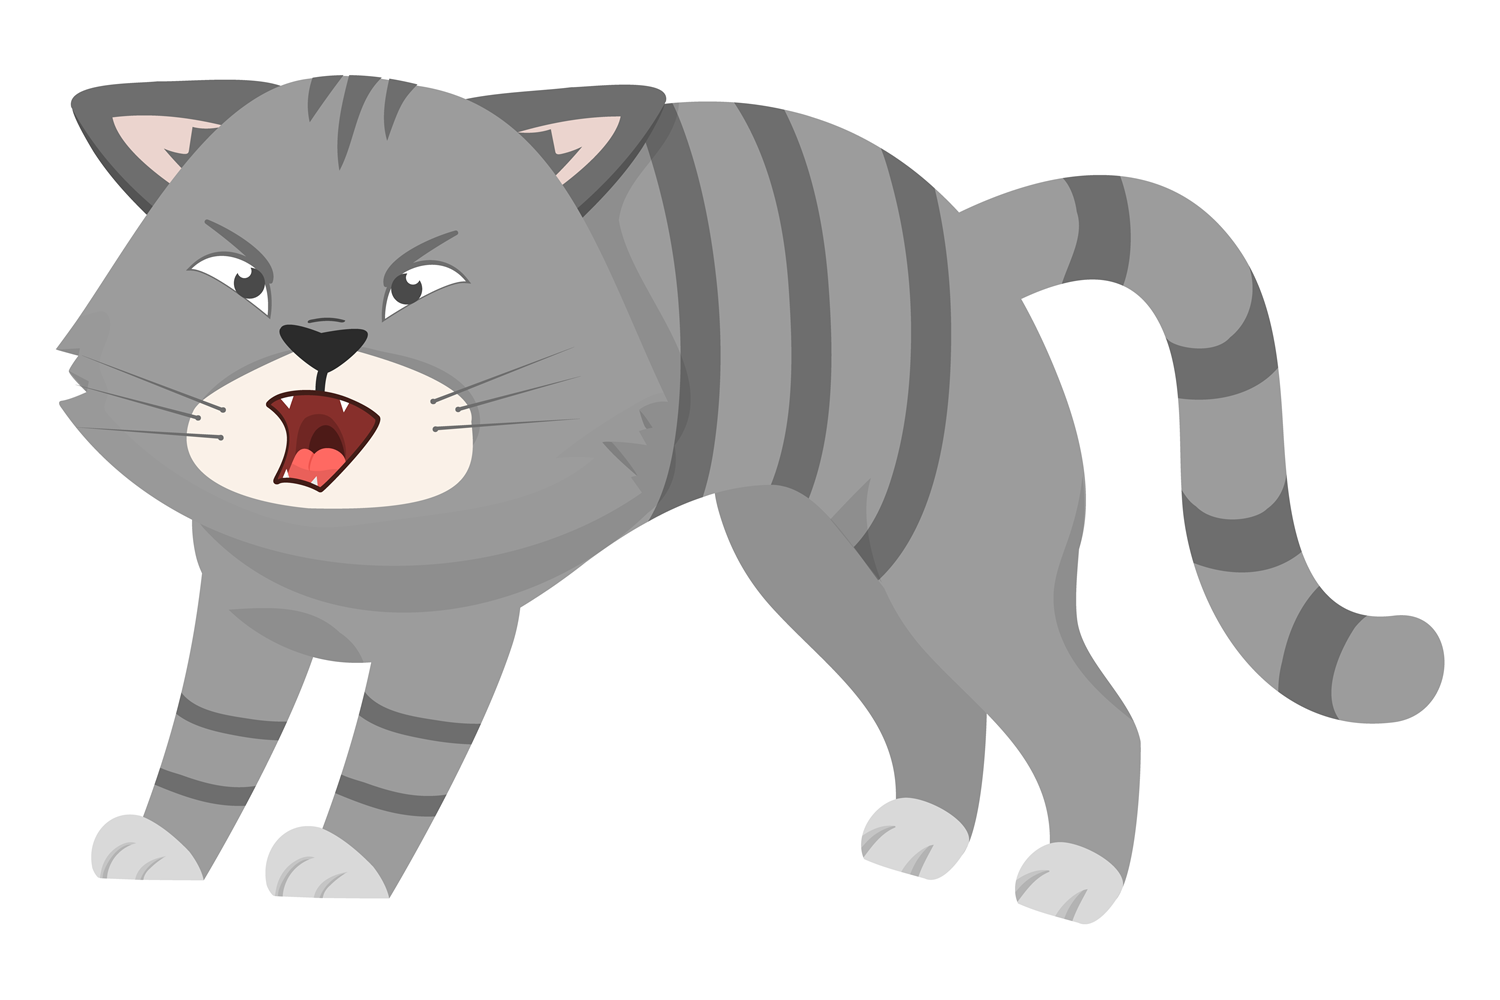 Angry Cat Cartoon Vector & Photo (Free Trial)